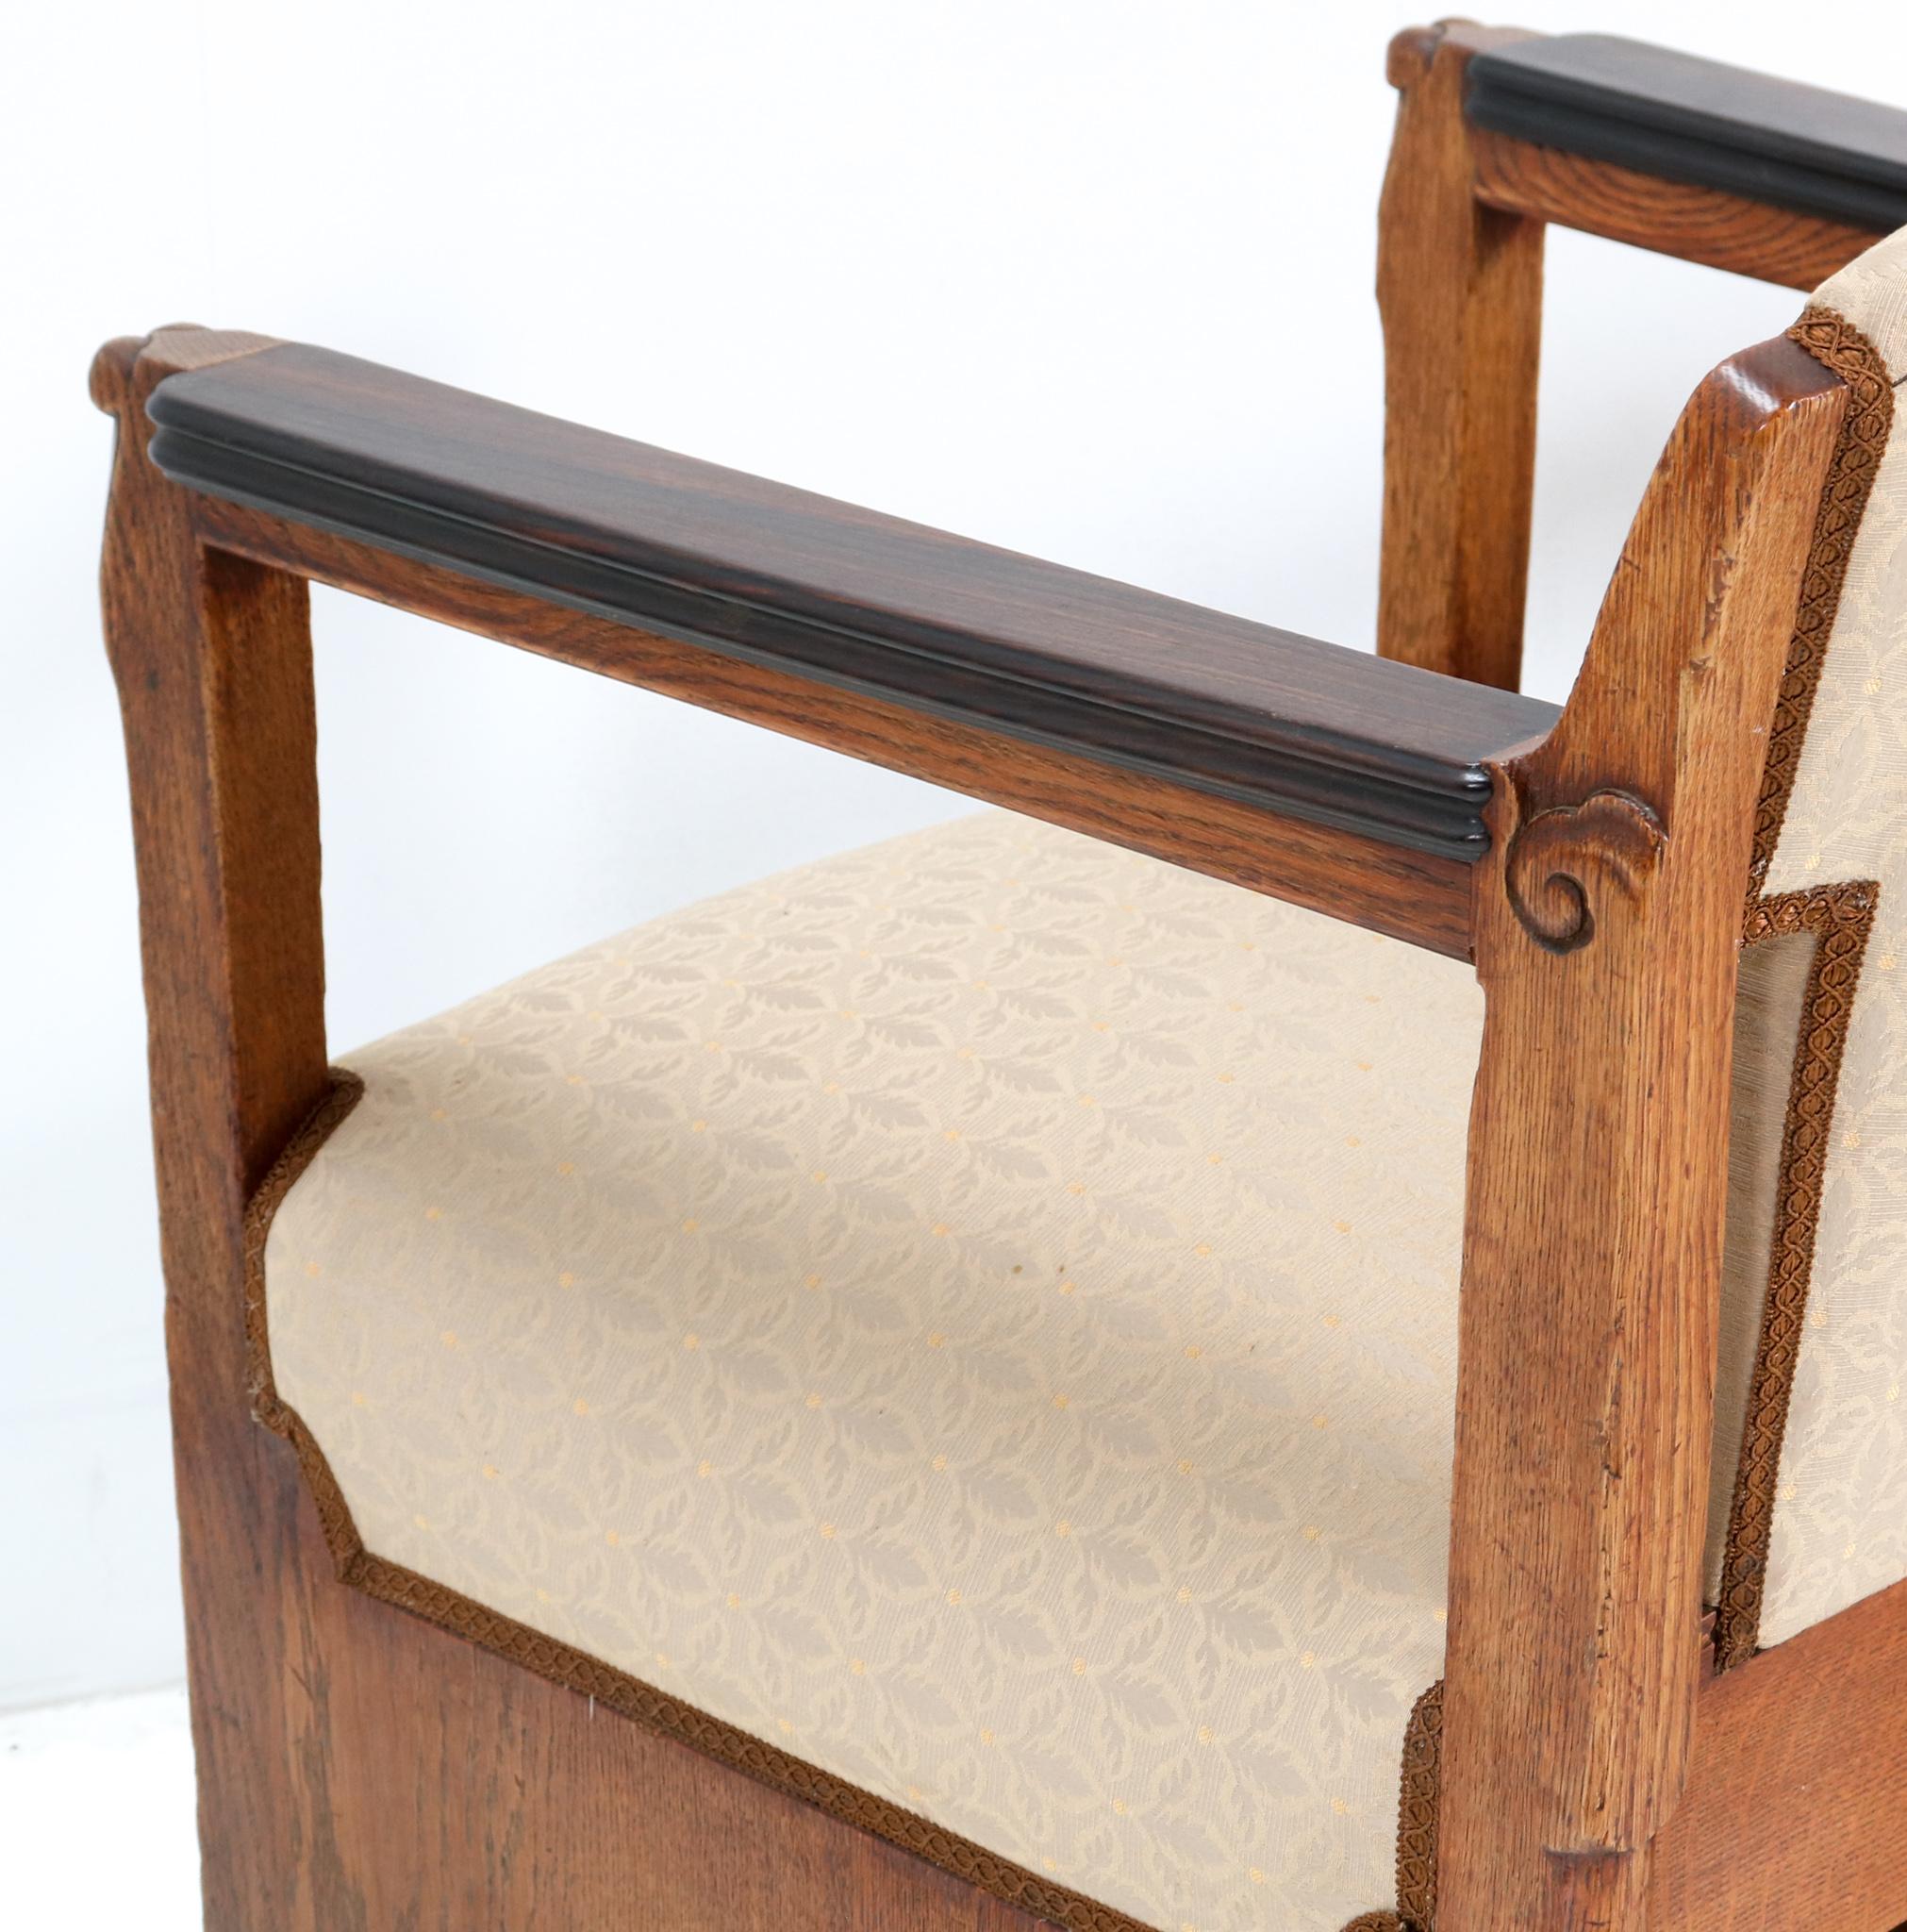 Two Oak Art Deco Amsterdamse School Armchairs by Hildo Krop for 't Woonhuys For Sale 8